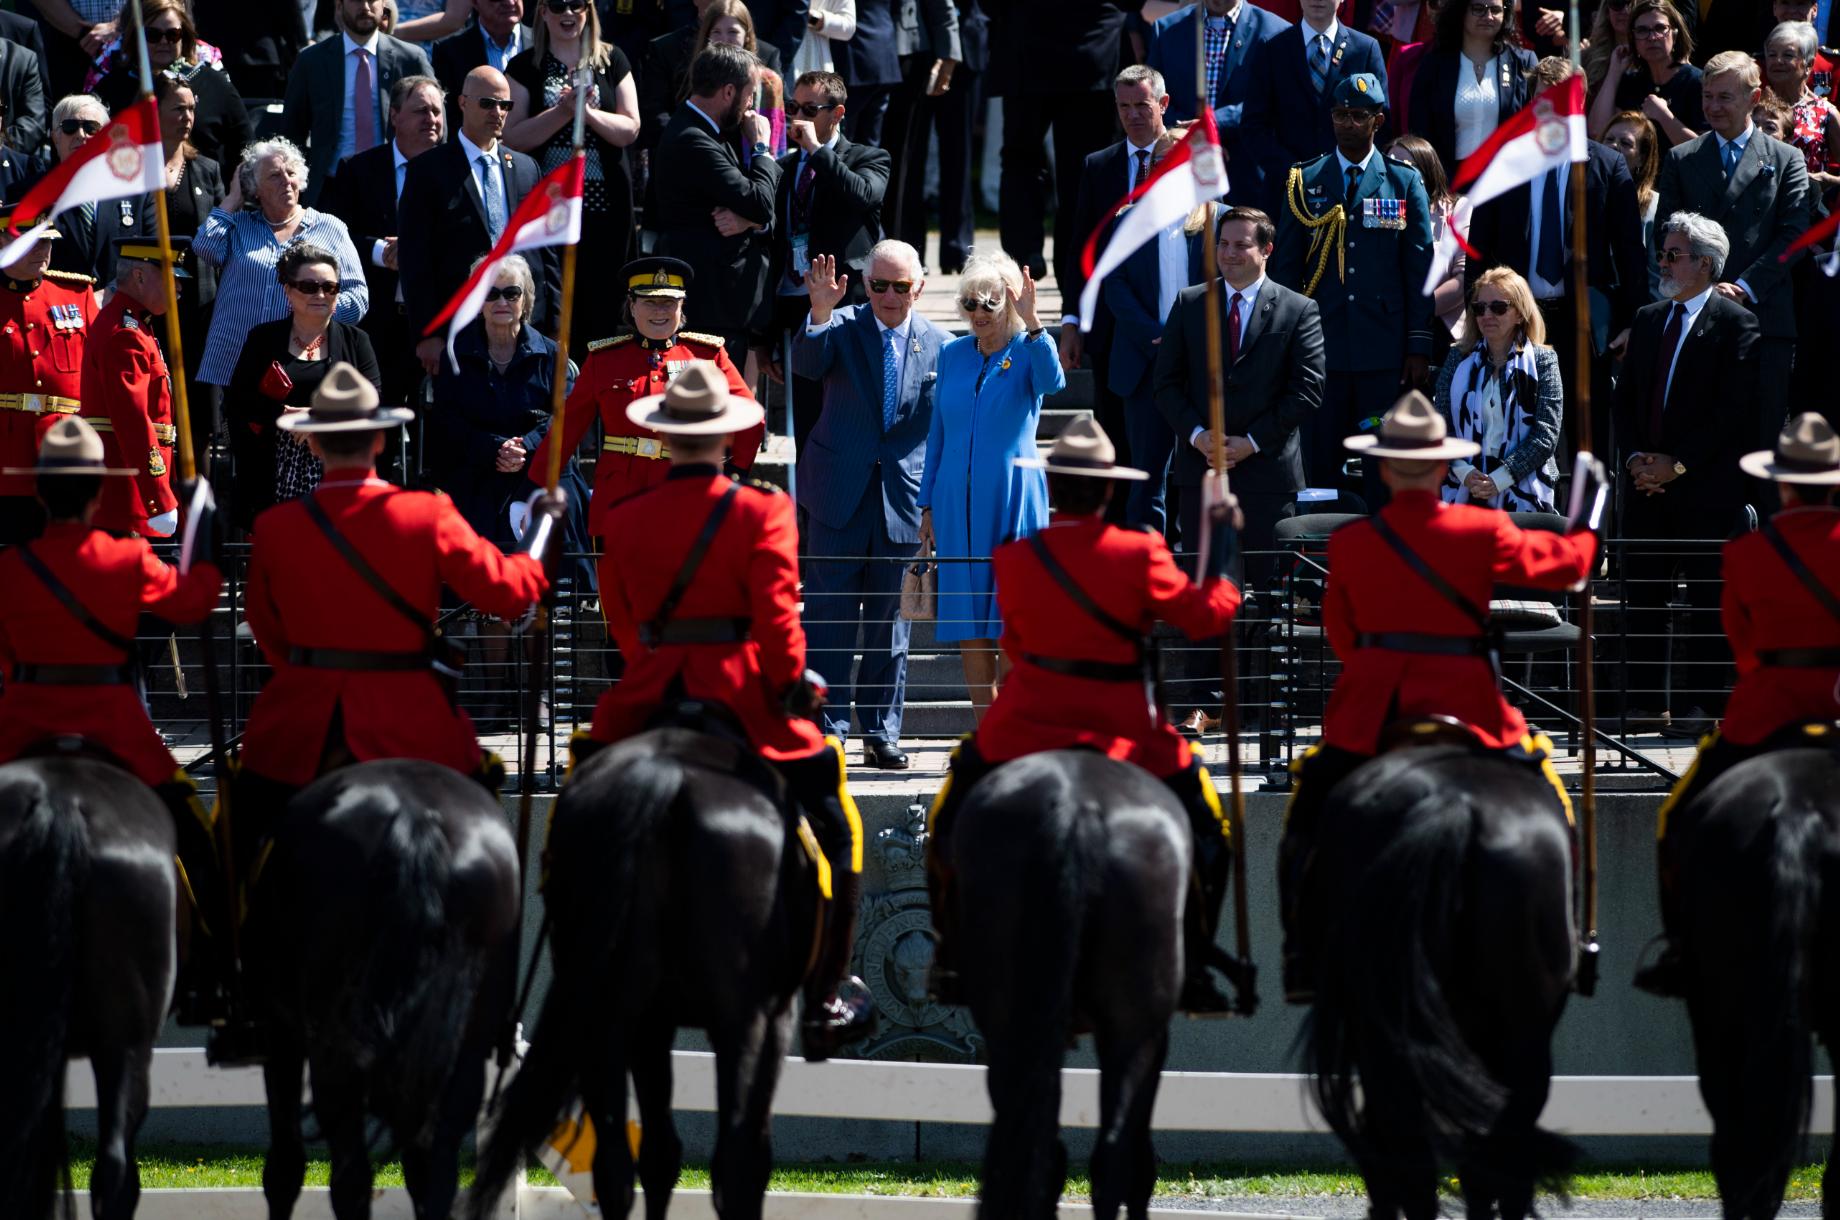 In this wide shot, the backs of mounties on horses are seen while Charles and Camilla face the camera waving.